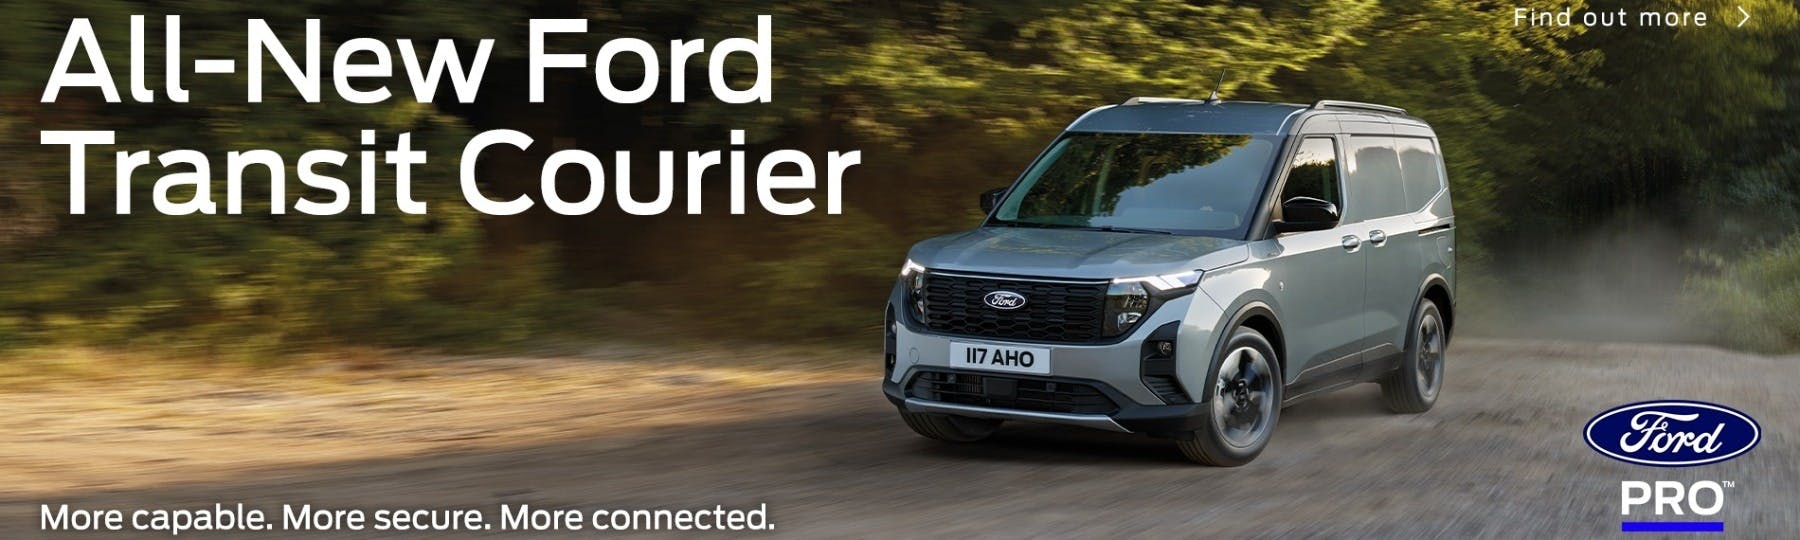 All-New Ford Transit Courier New Van Offer